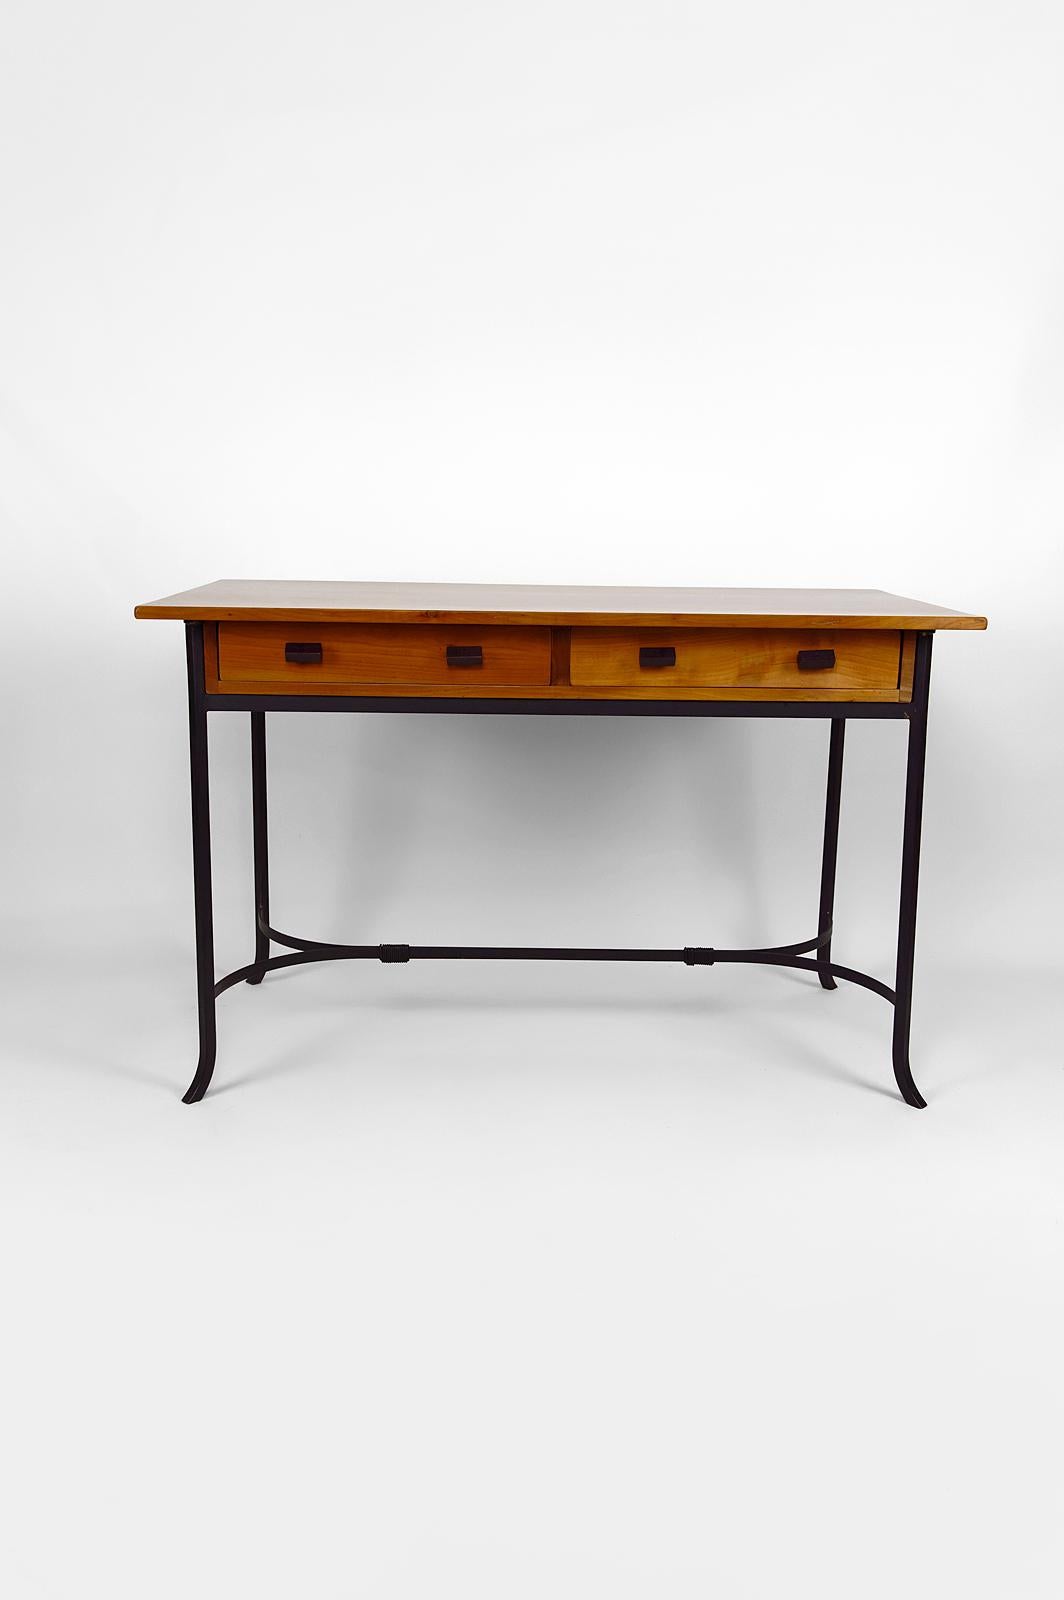 Pretty desk from the 80s with 2 through drawers.
The top and drawers are in solid cherry wood. The structure and the handles are in wrought iron.

Contemporary Design / Modernist, France, circa 1980.

In good condition.

Dimensions:
Height